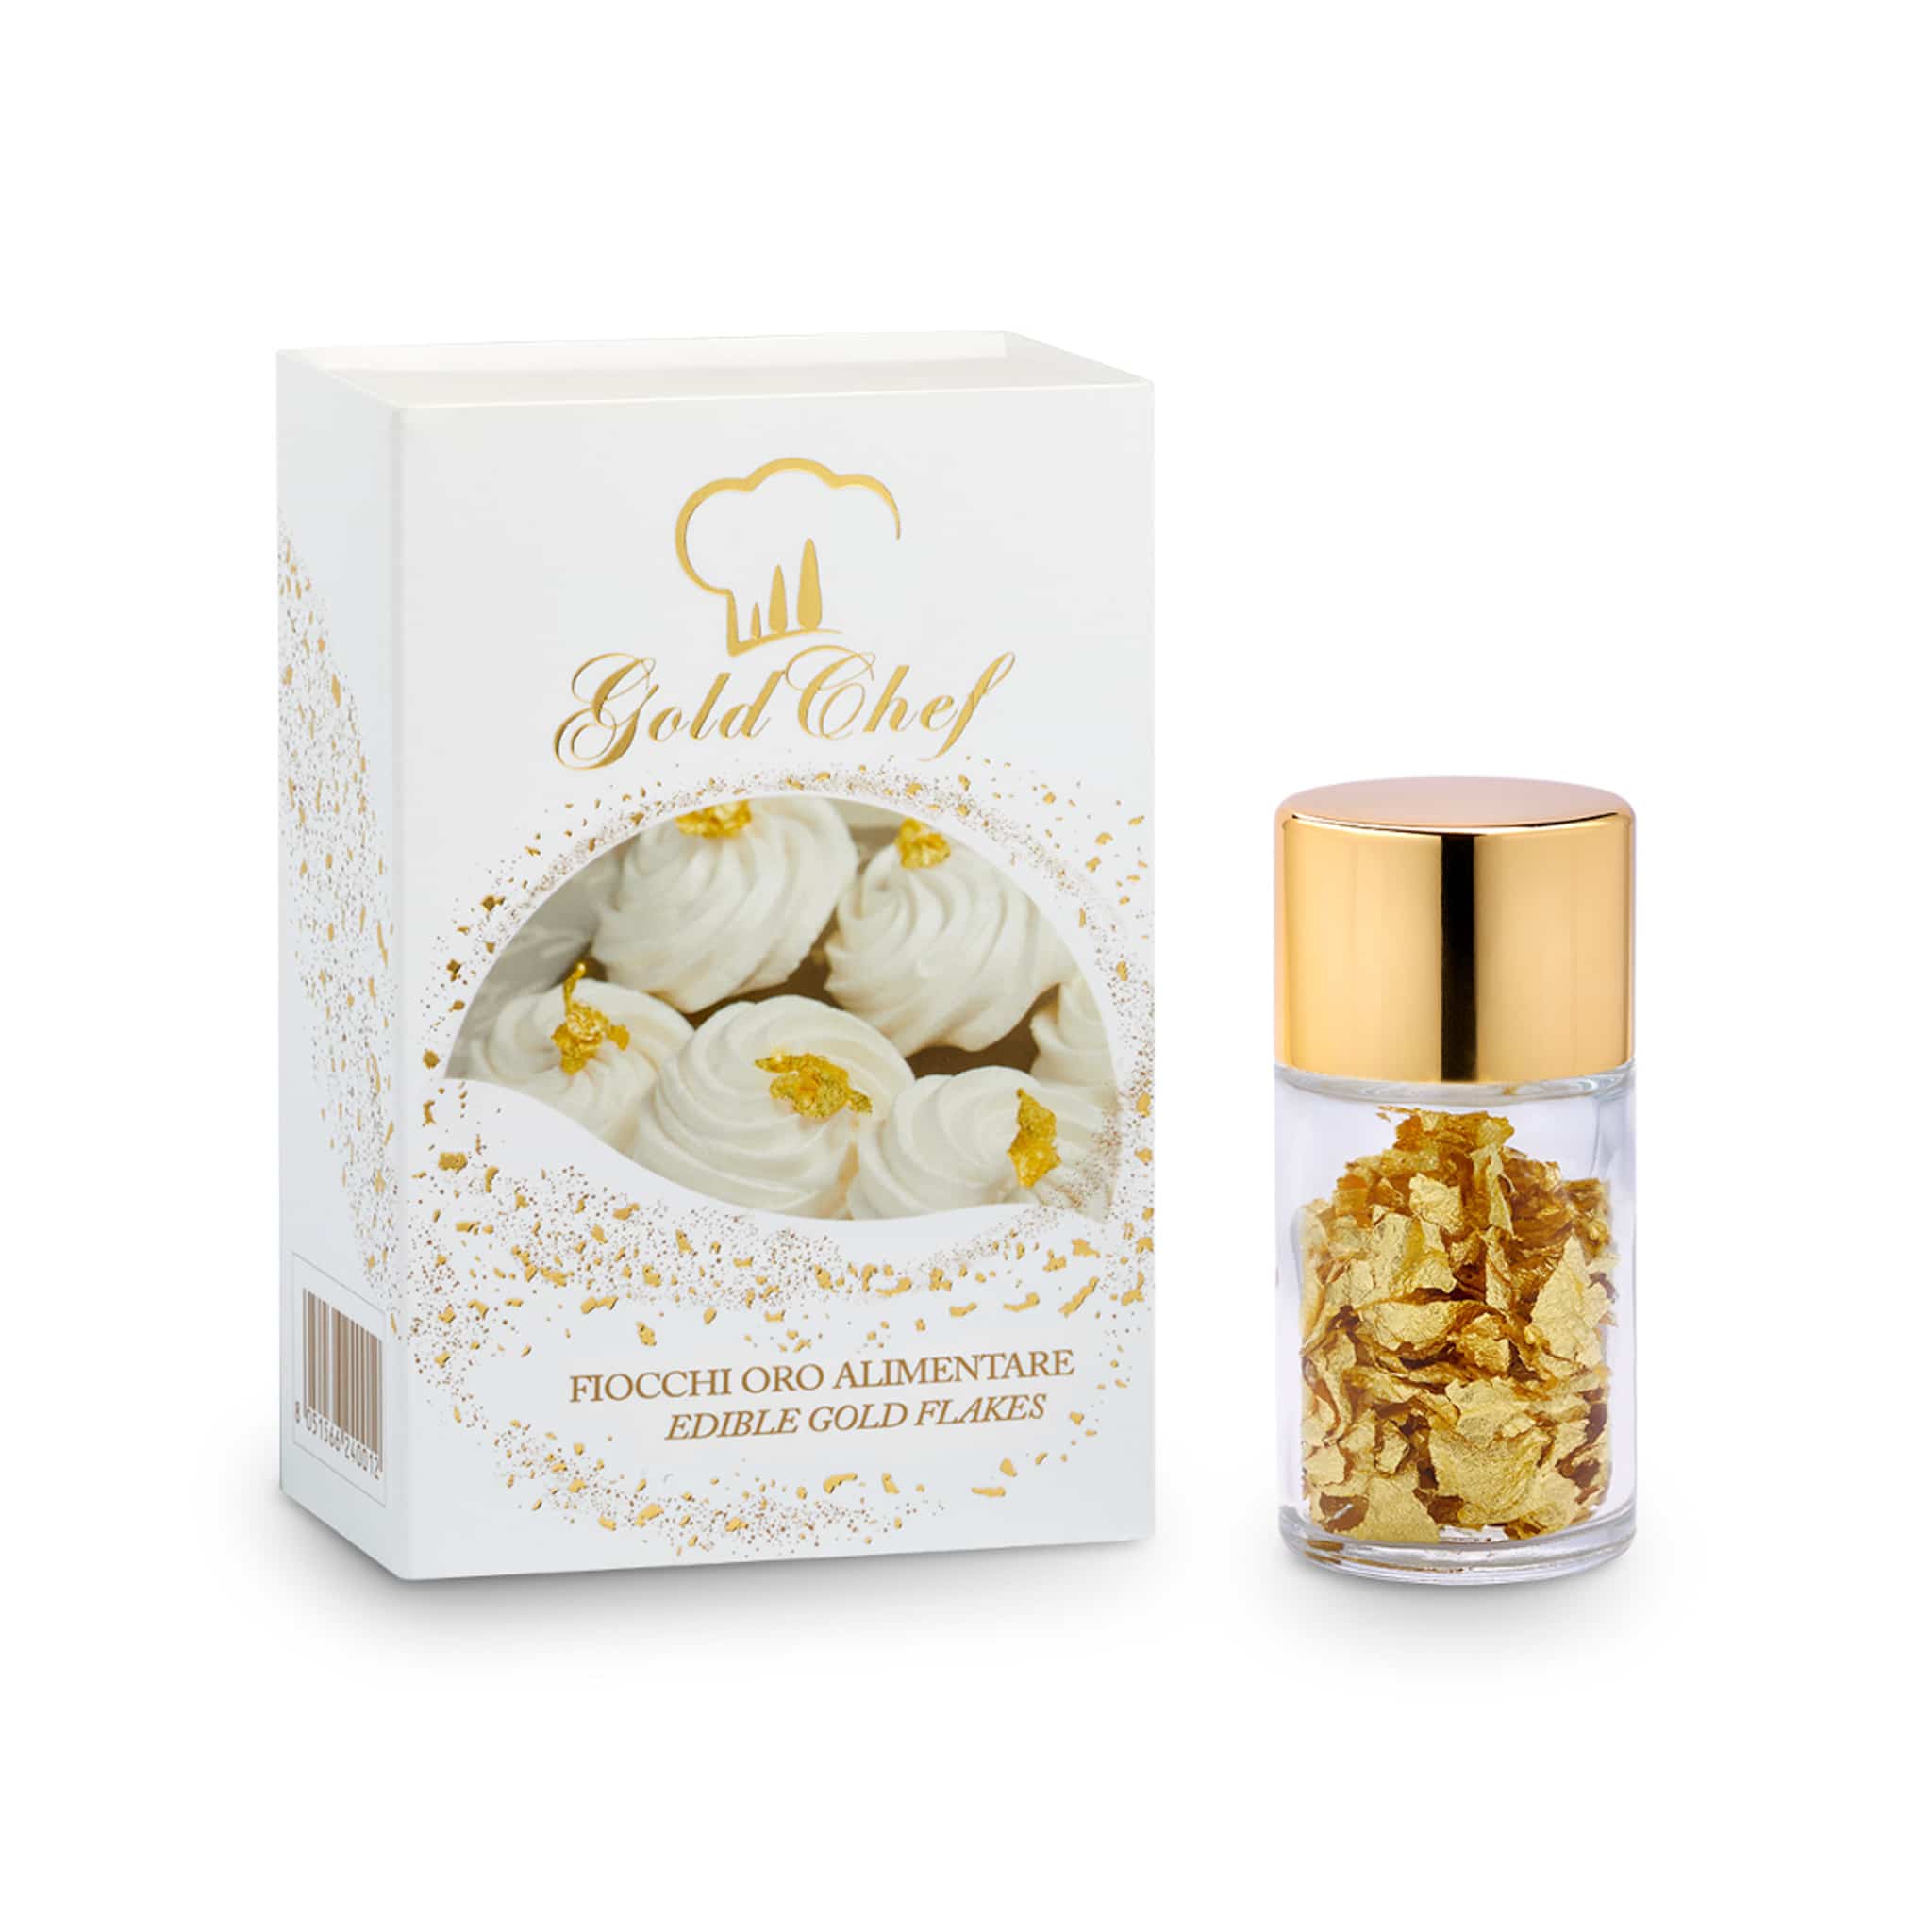 Edible Gold Leaf Flakes | Buy Pure Gold Flakes for Cakes, 100 mg